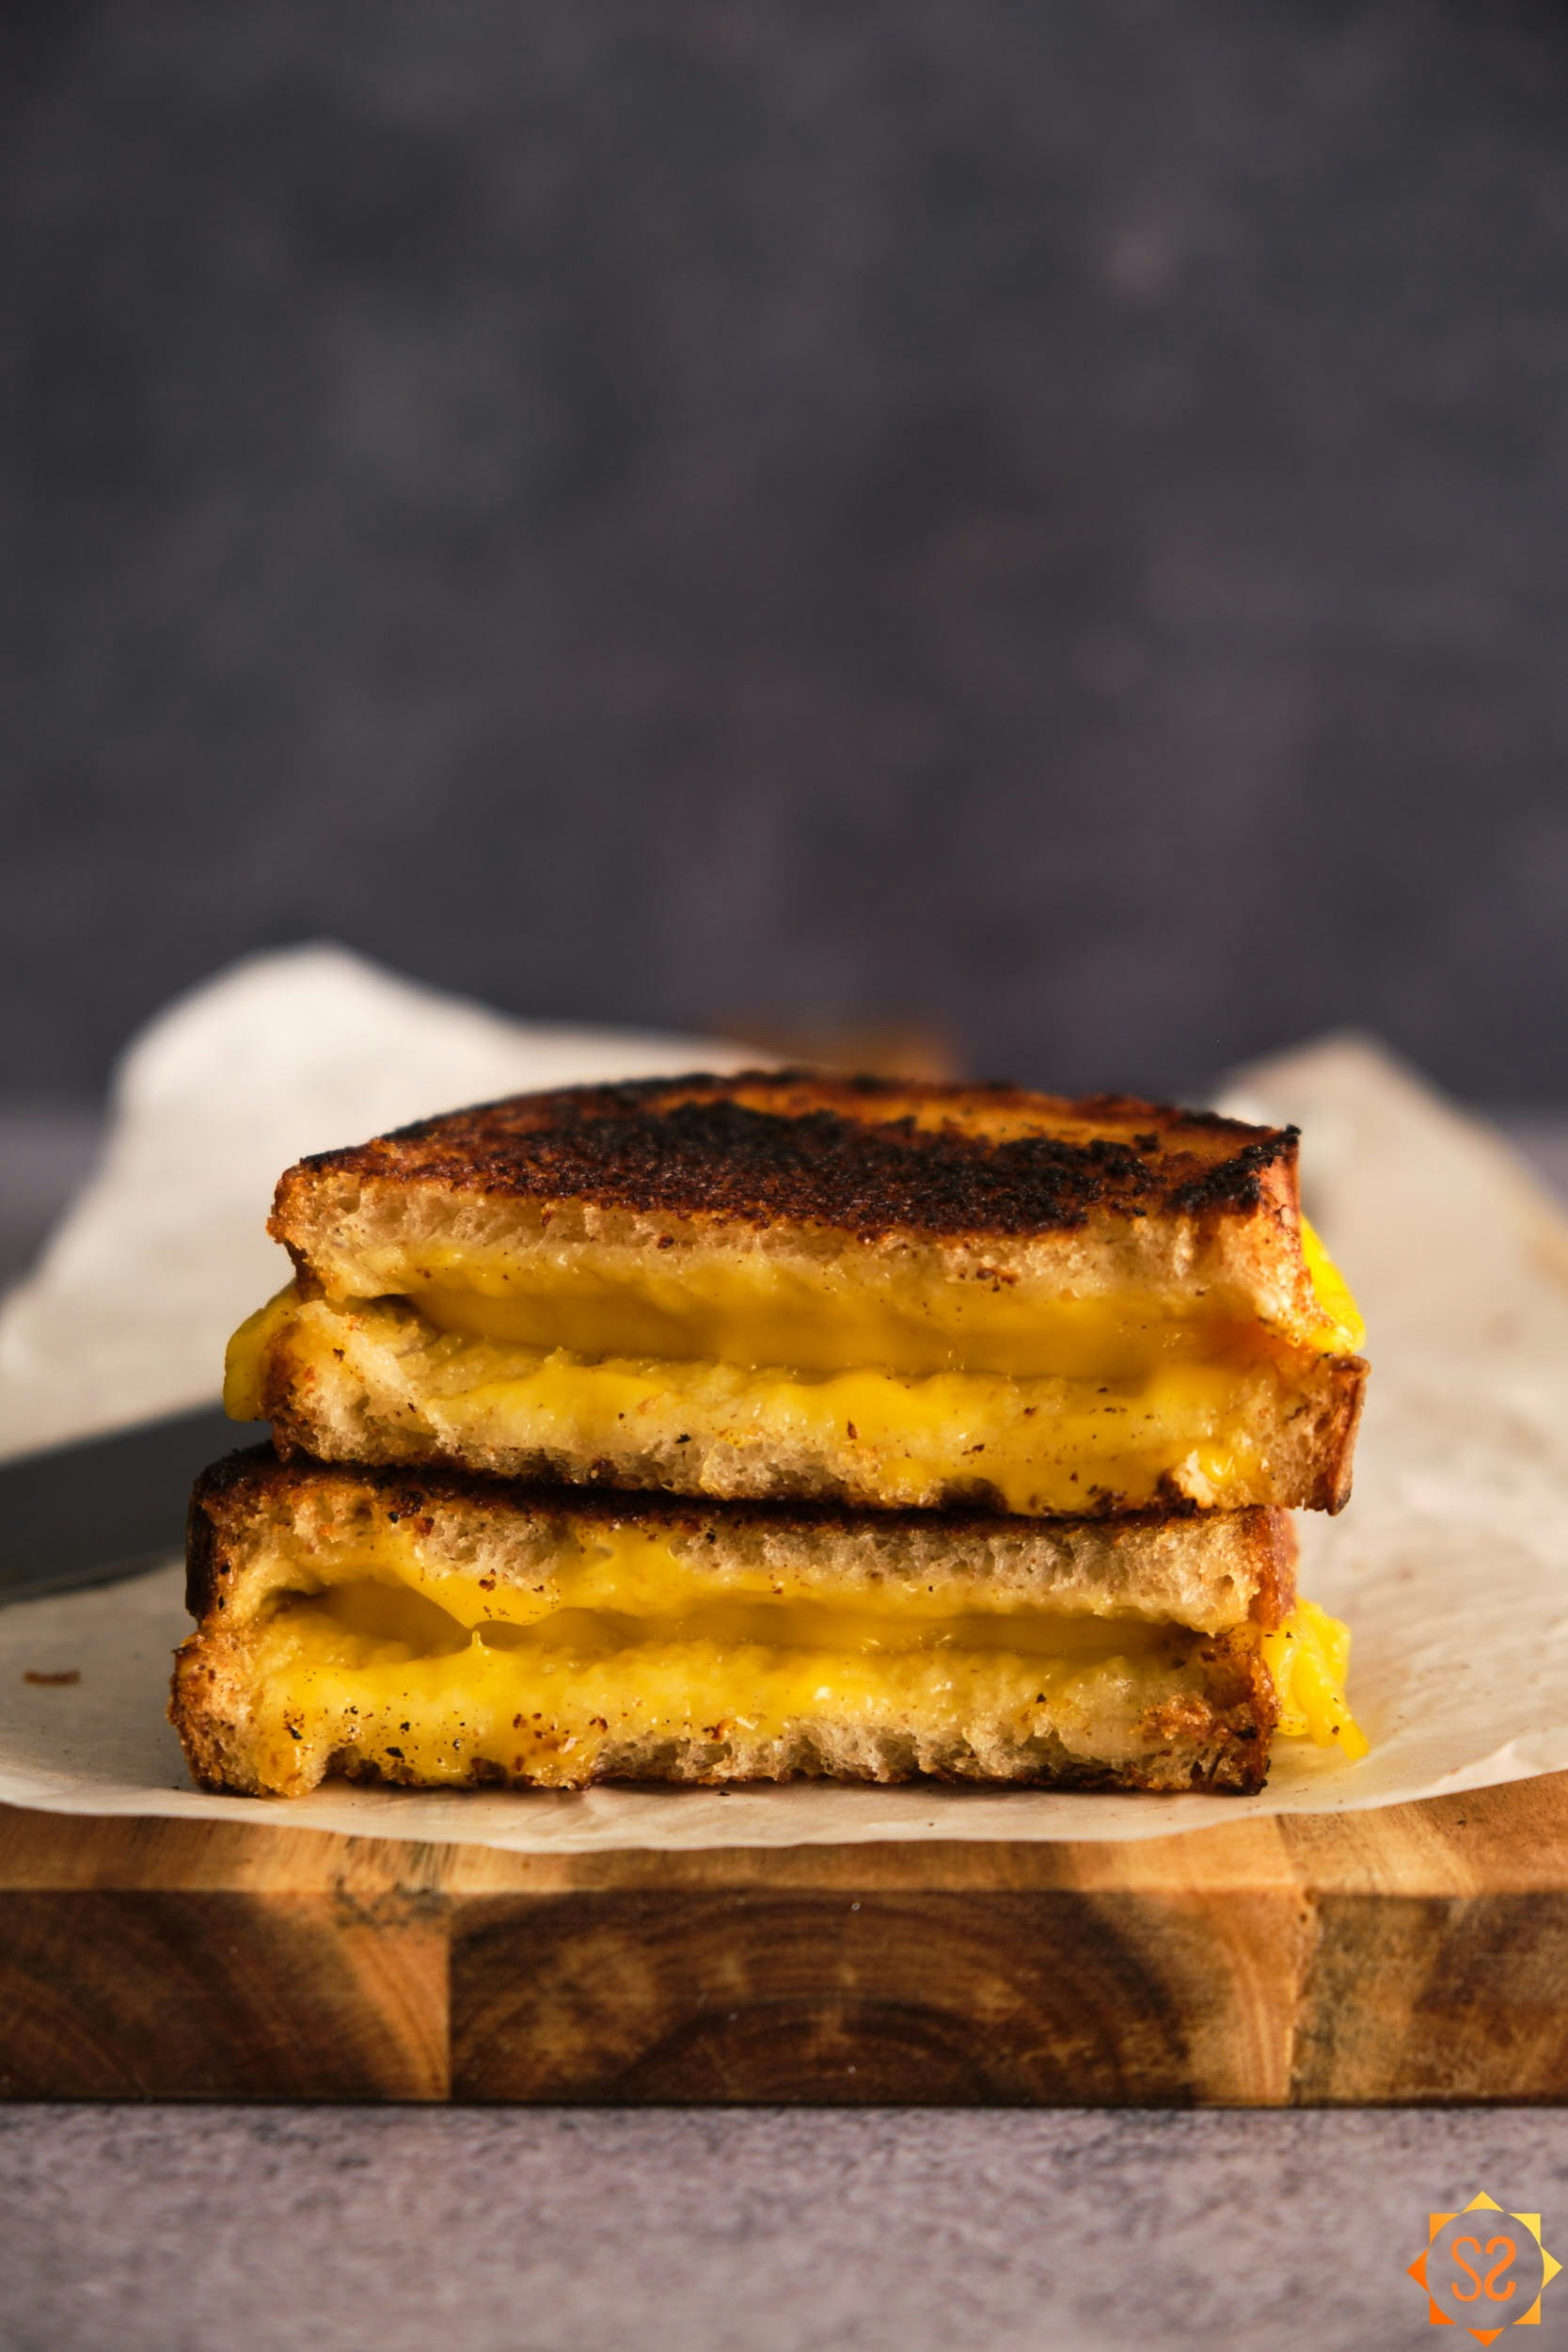 A side view of a grilled cheese sandwich made with Violife Mature Cheddar, stacked